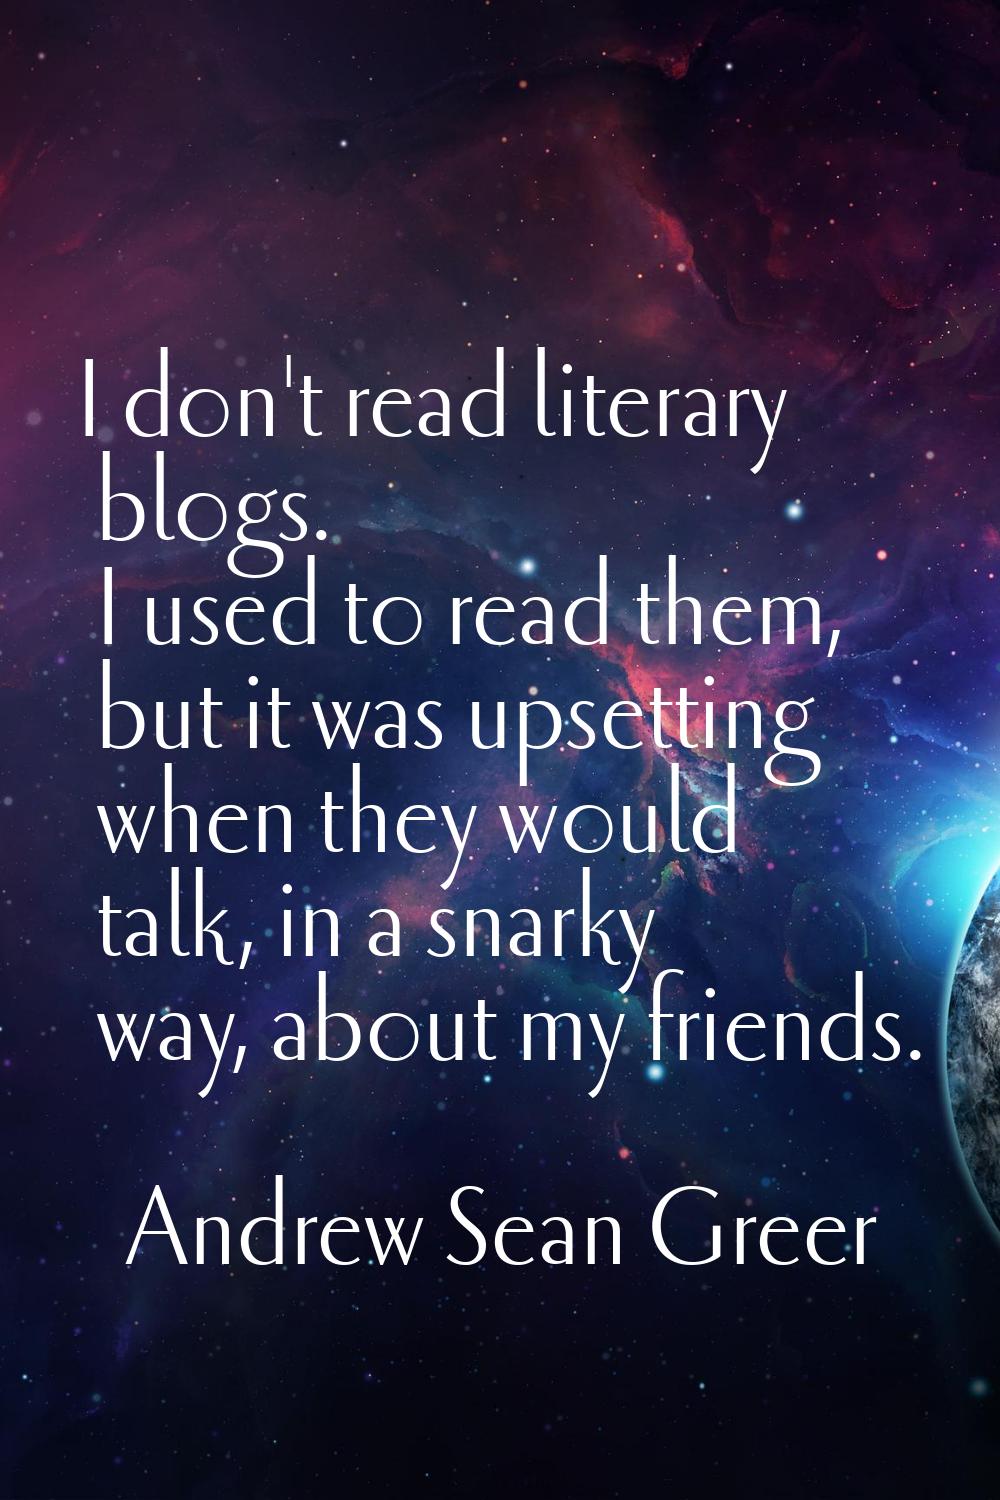 I don't read literary blogs. I used to read them, but it was upsetting when they would talk, in a s